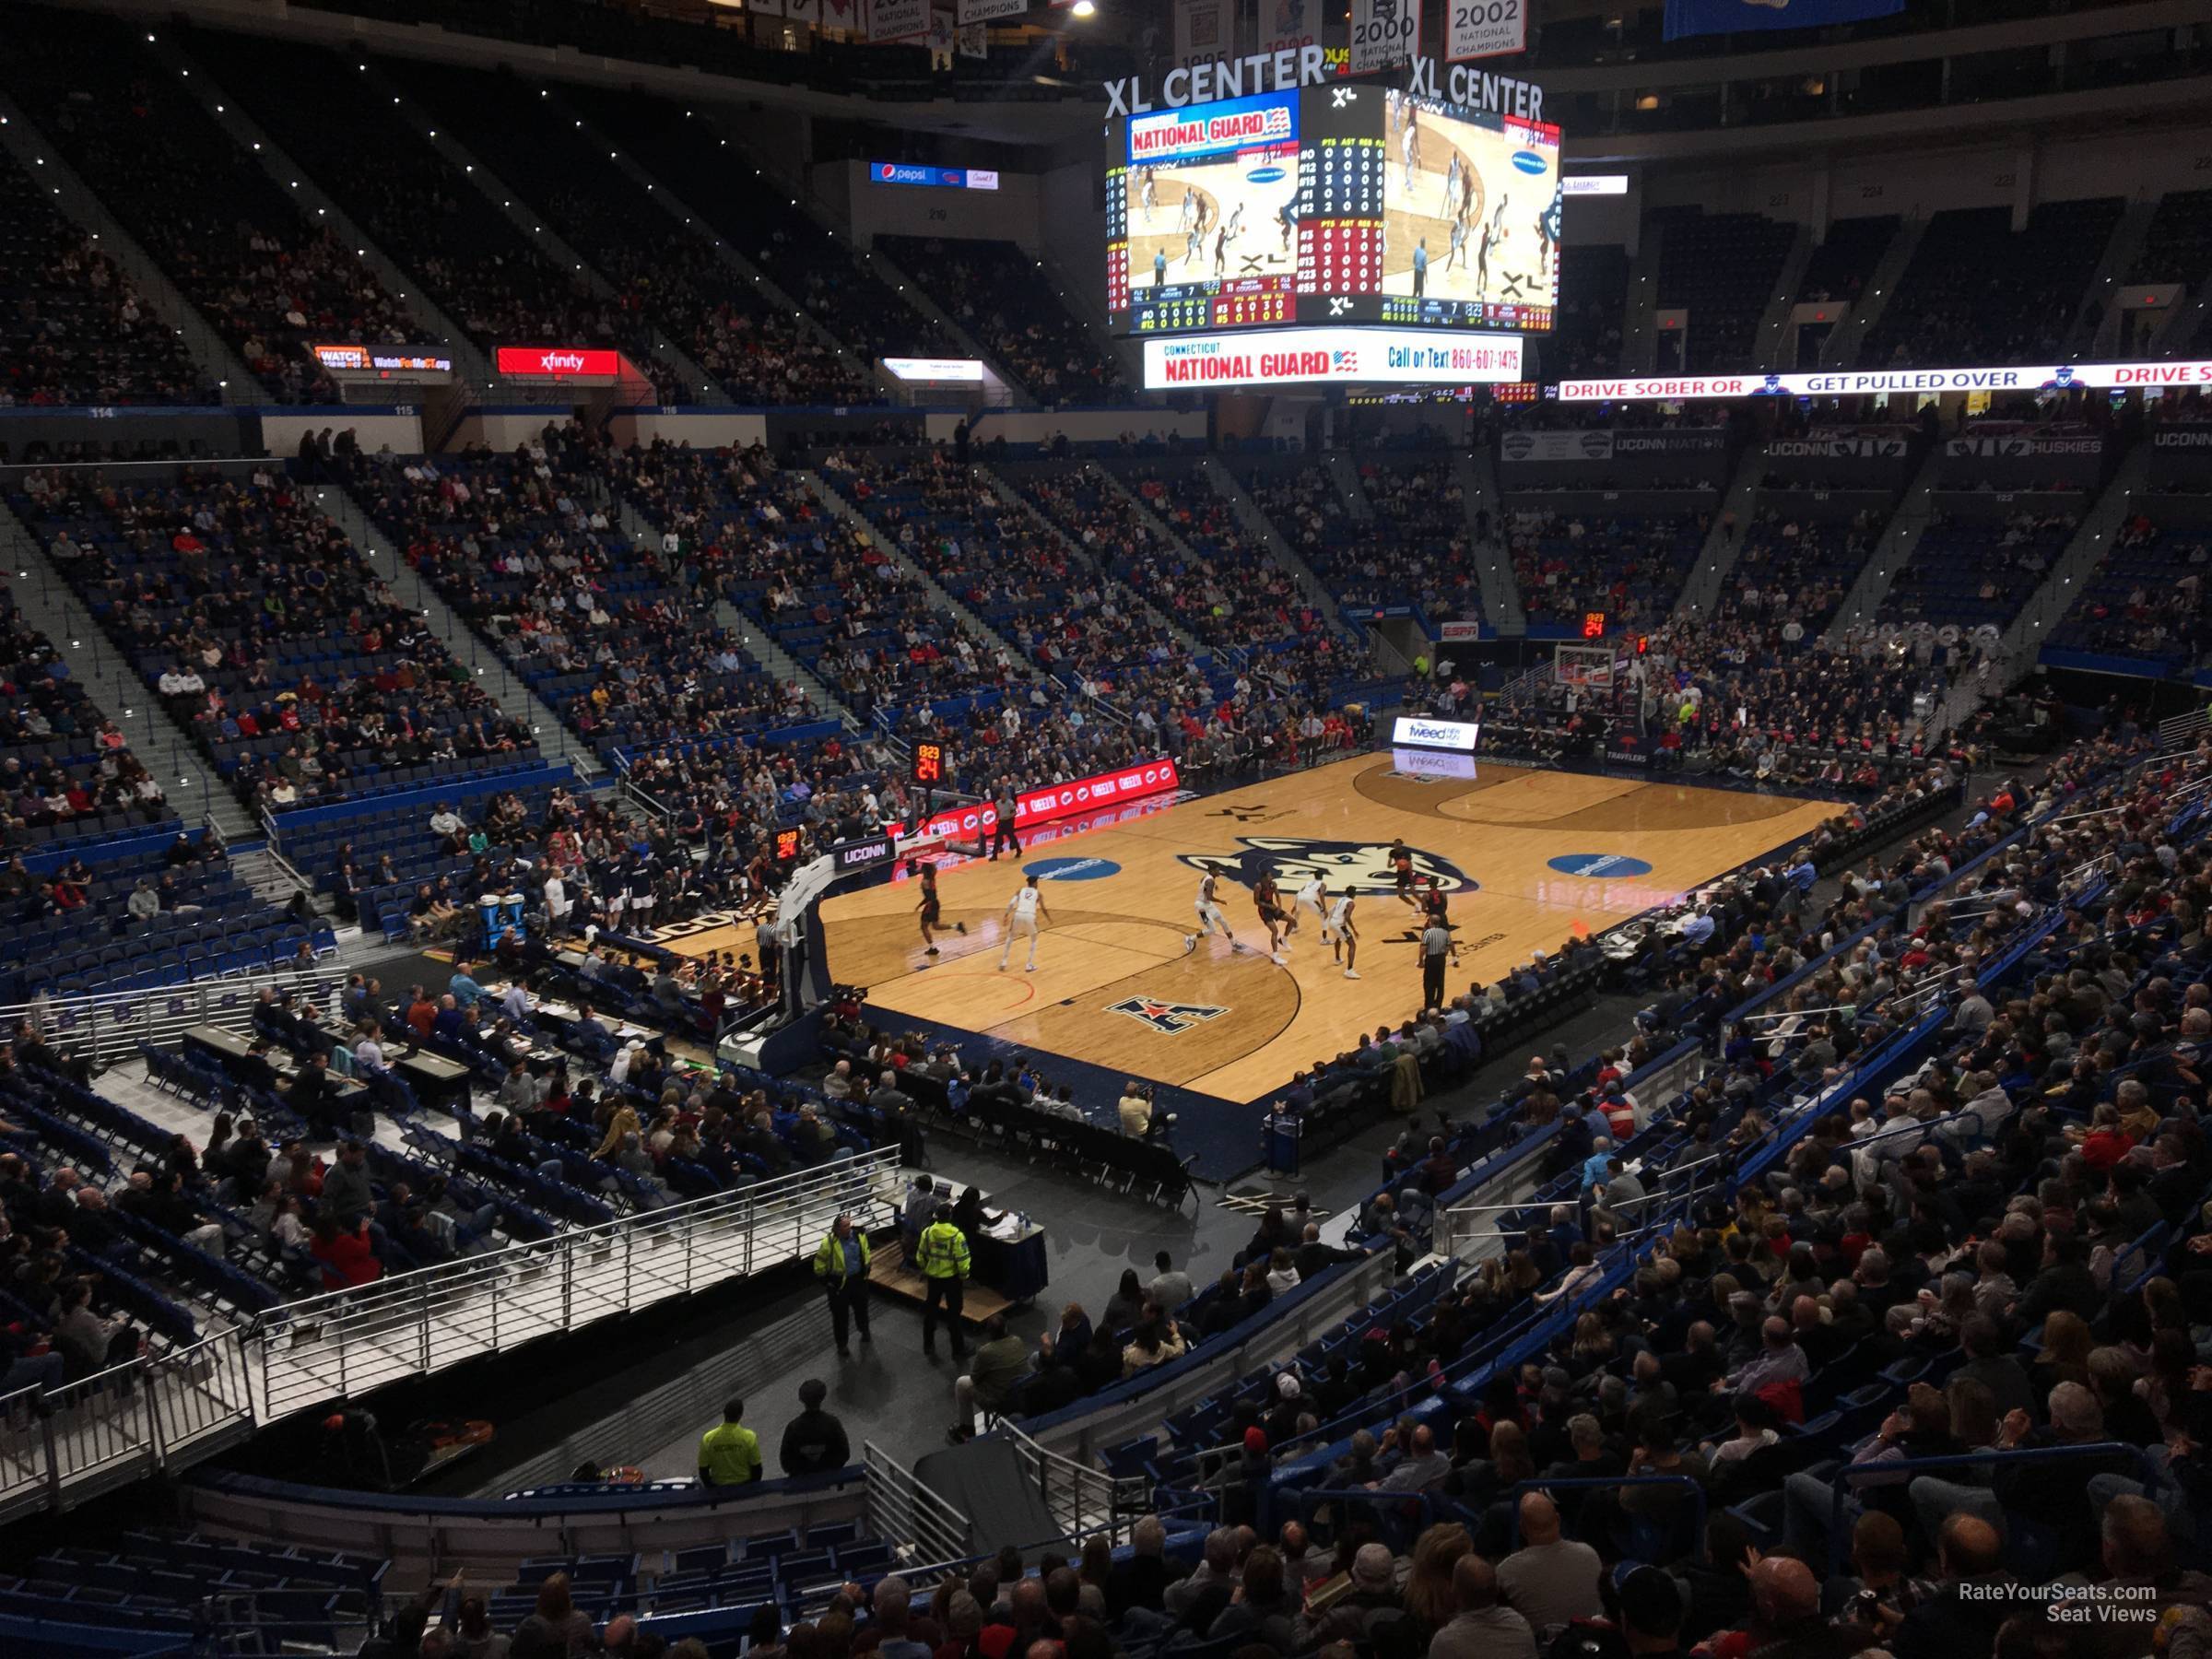 section 107, row r seat view  - xl center